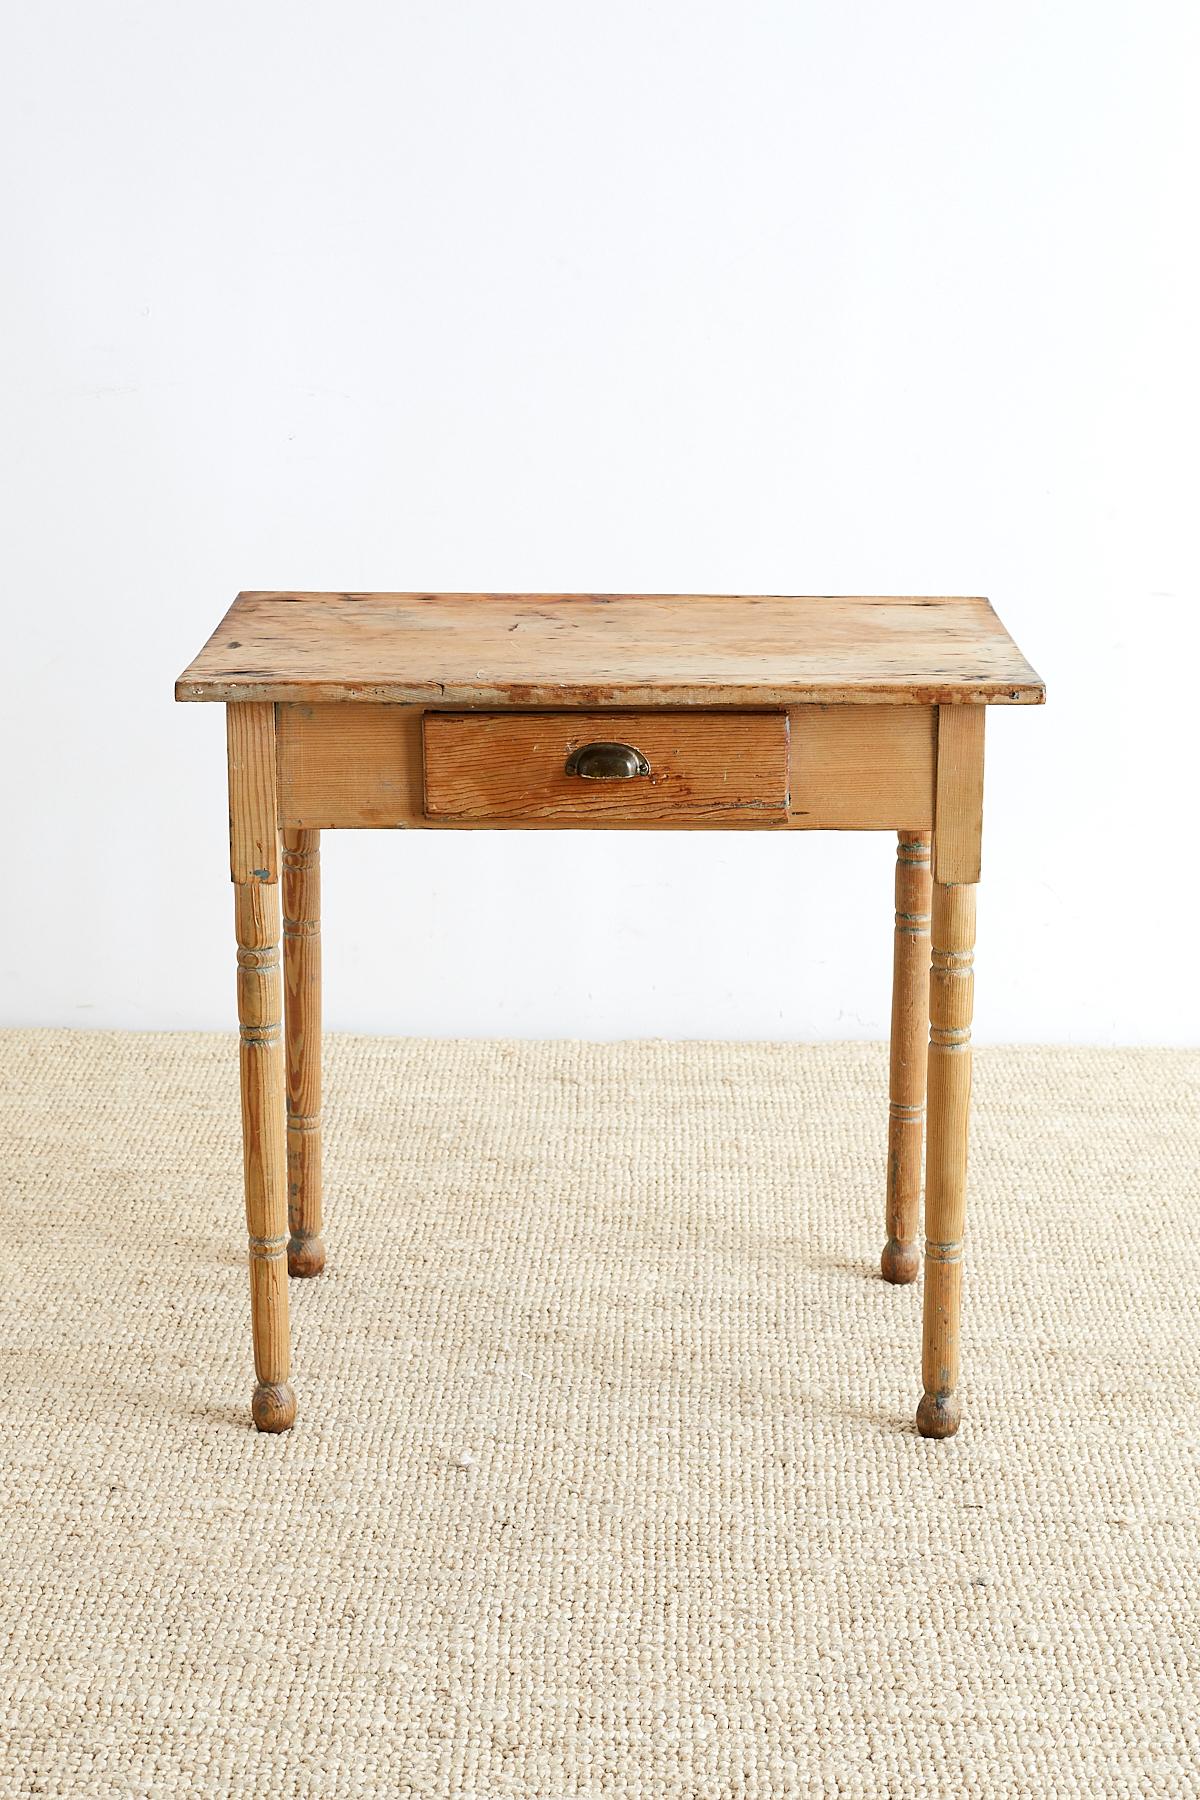 19th century rustic pine farmhouse table or work table. Features a simple provincial style construction with elegant turned pine legs and round feet. Fronted by a small drawer with a brass pull. Lovely distressed patina with good joinery.

Offered